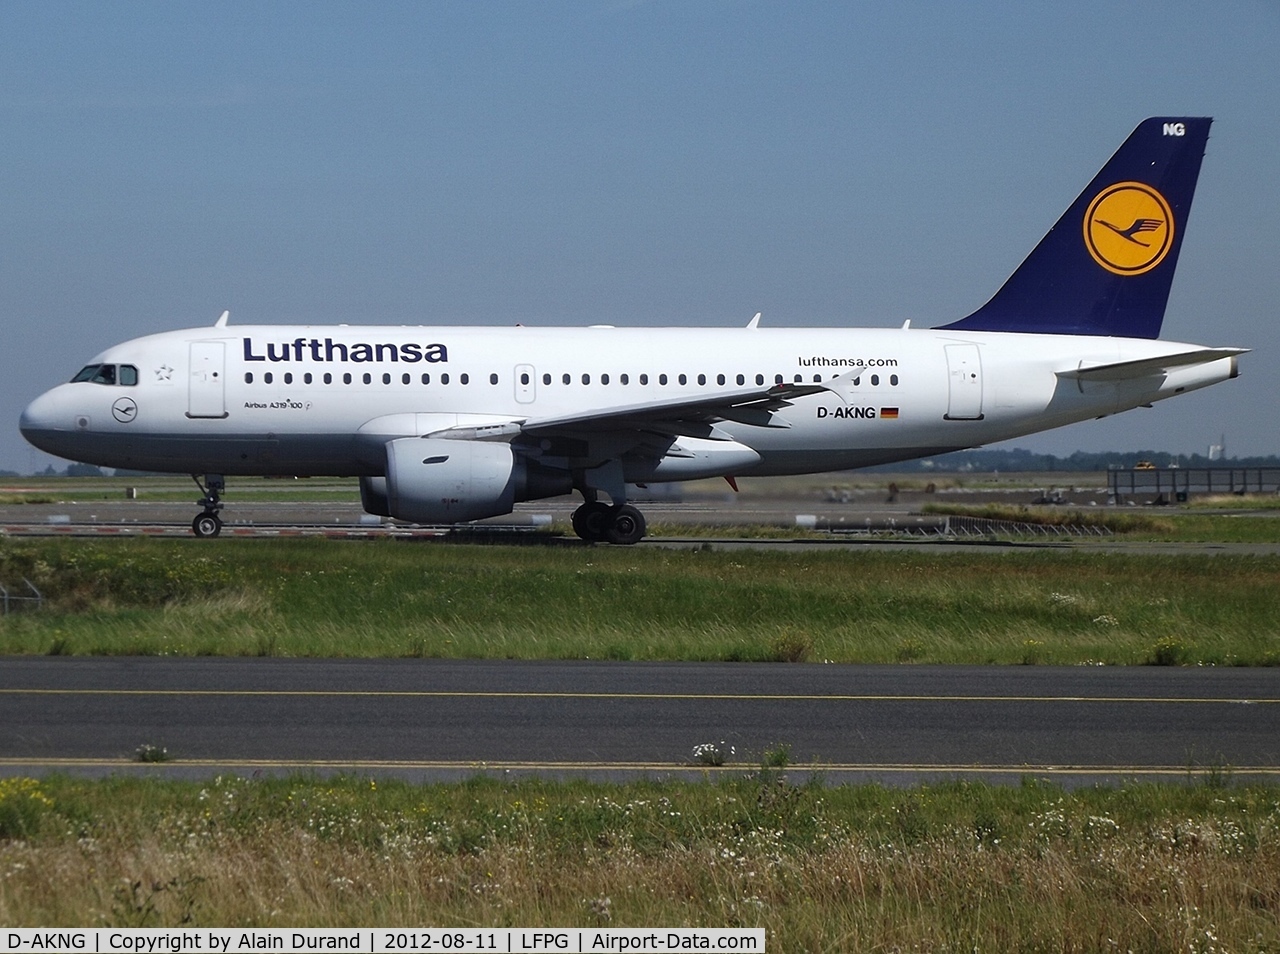 D-AKNG, 1997 Airbus A319-112 C/N 654, Subsequently to the closure of Lufthansa Italia in Oct 2011, November-Gold underwent a period of dormancy which ended on 2012-05-25 when back in service with LH.